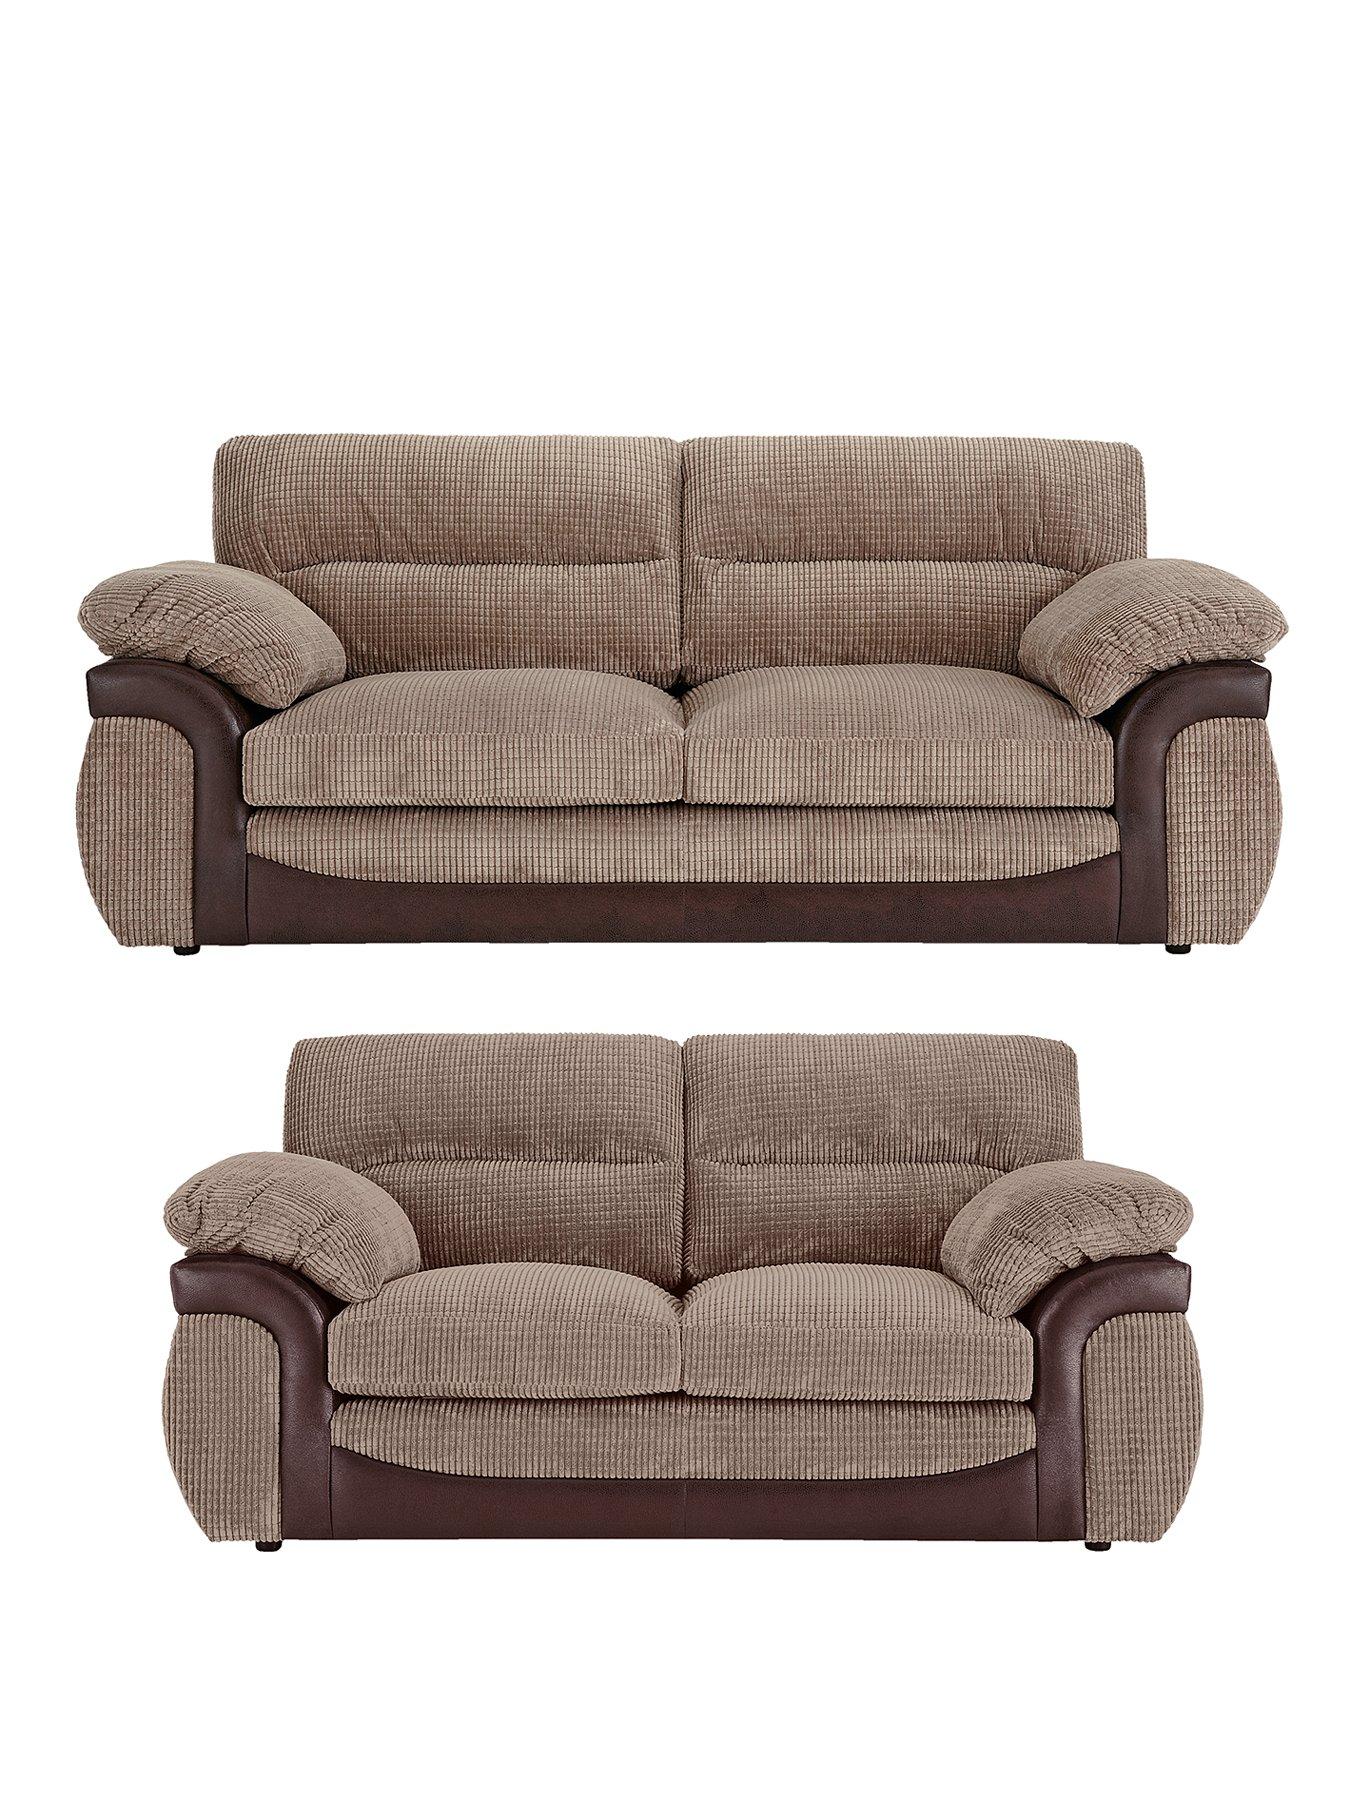 Lyla 3 Seater 2 Seater Sofa Set Buy And Save